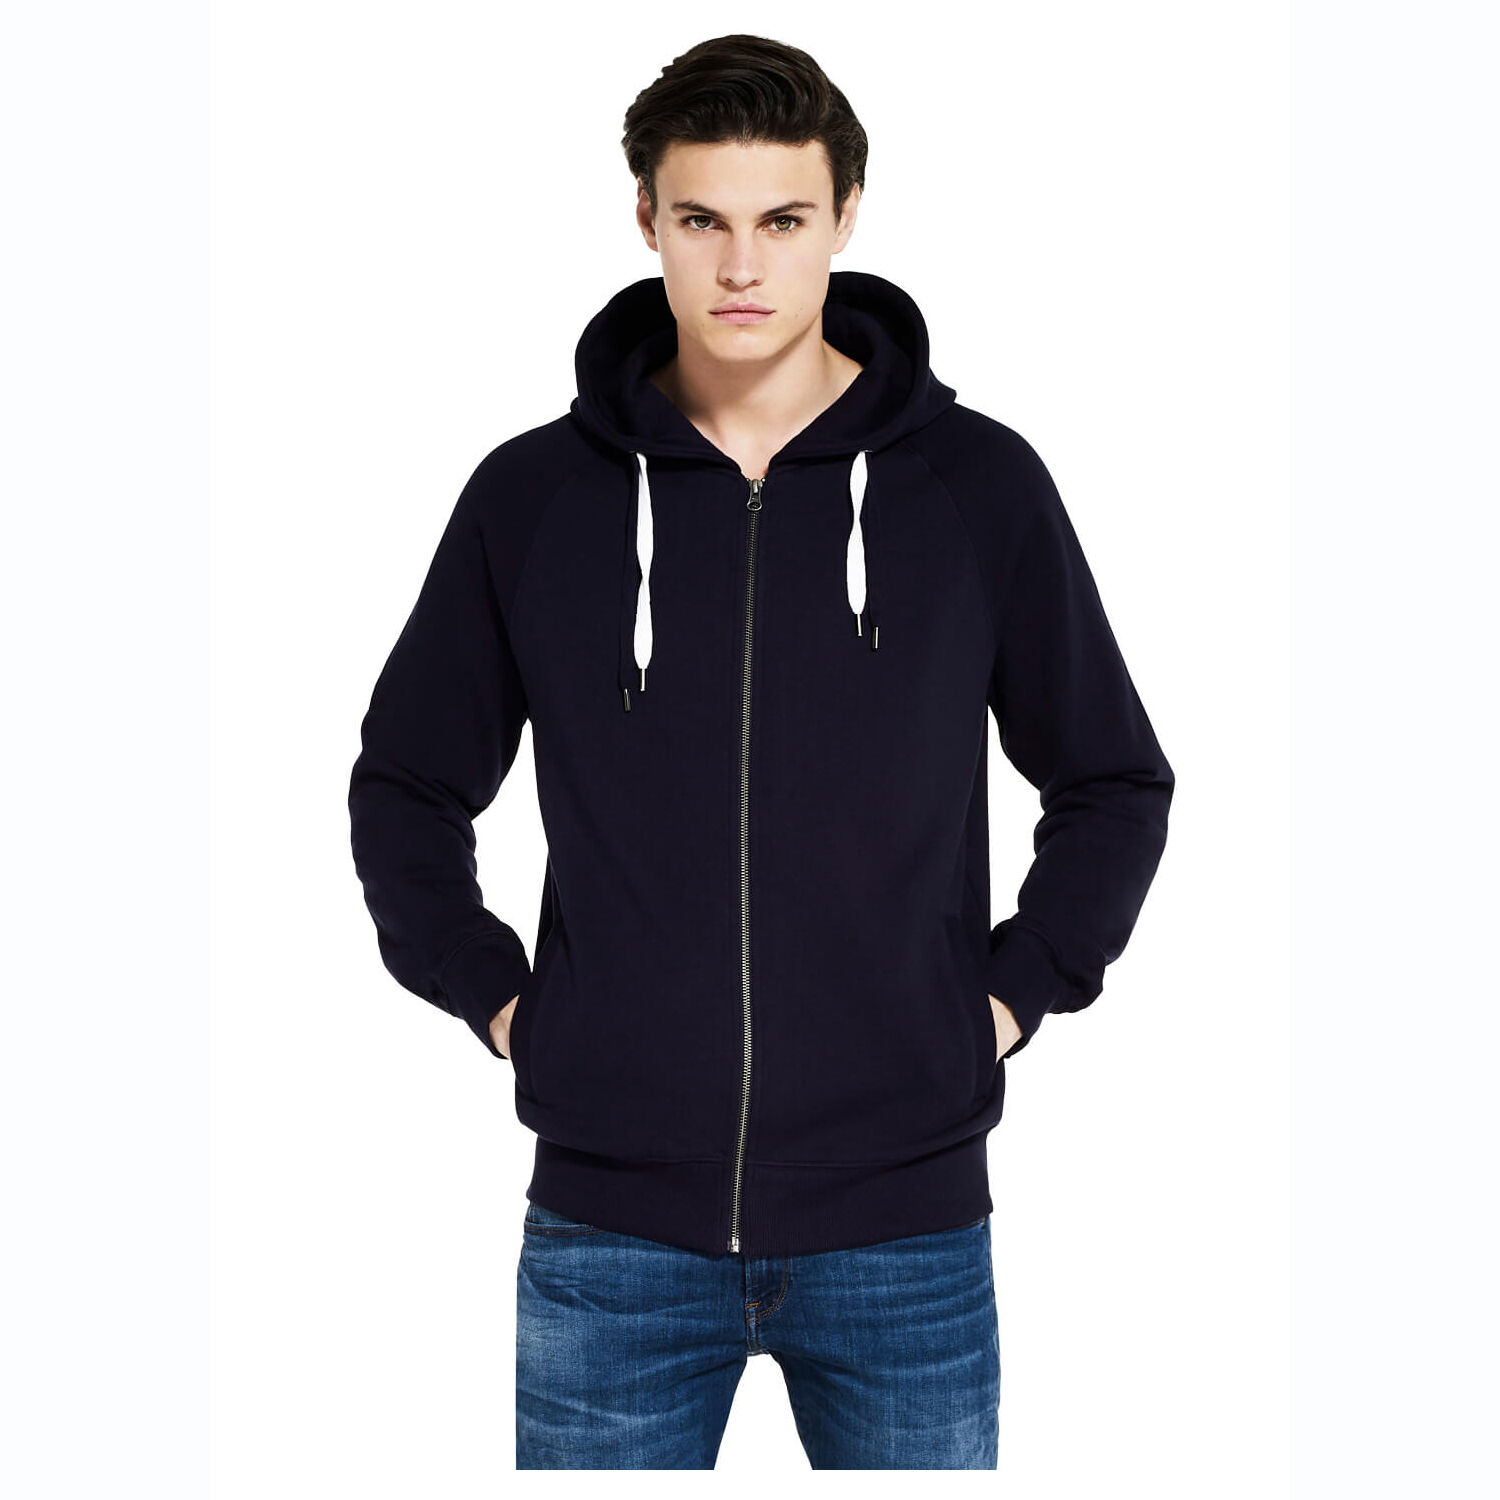 Earth Positive Organic Cotton Hooded Top